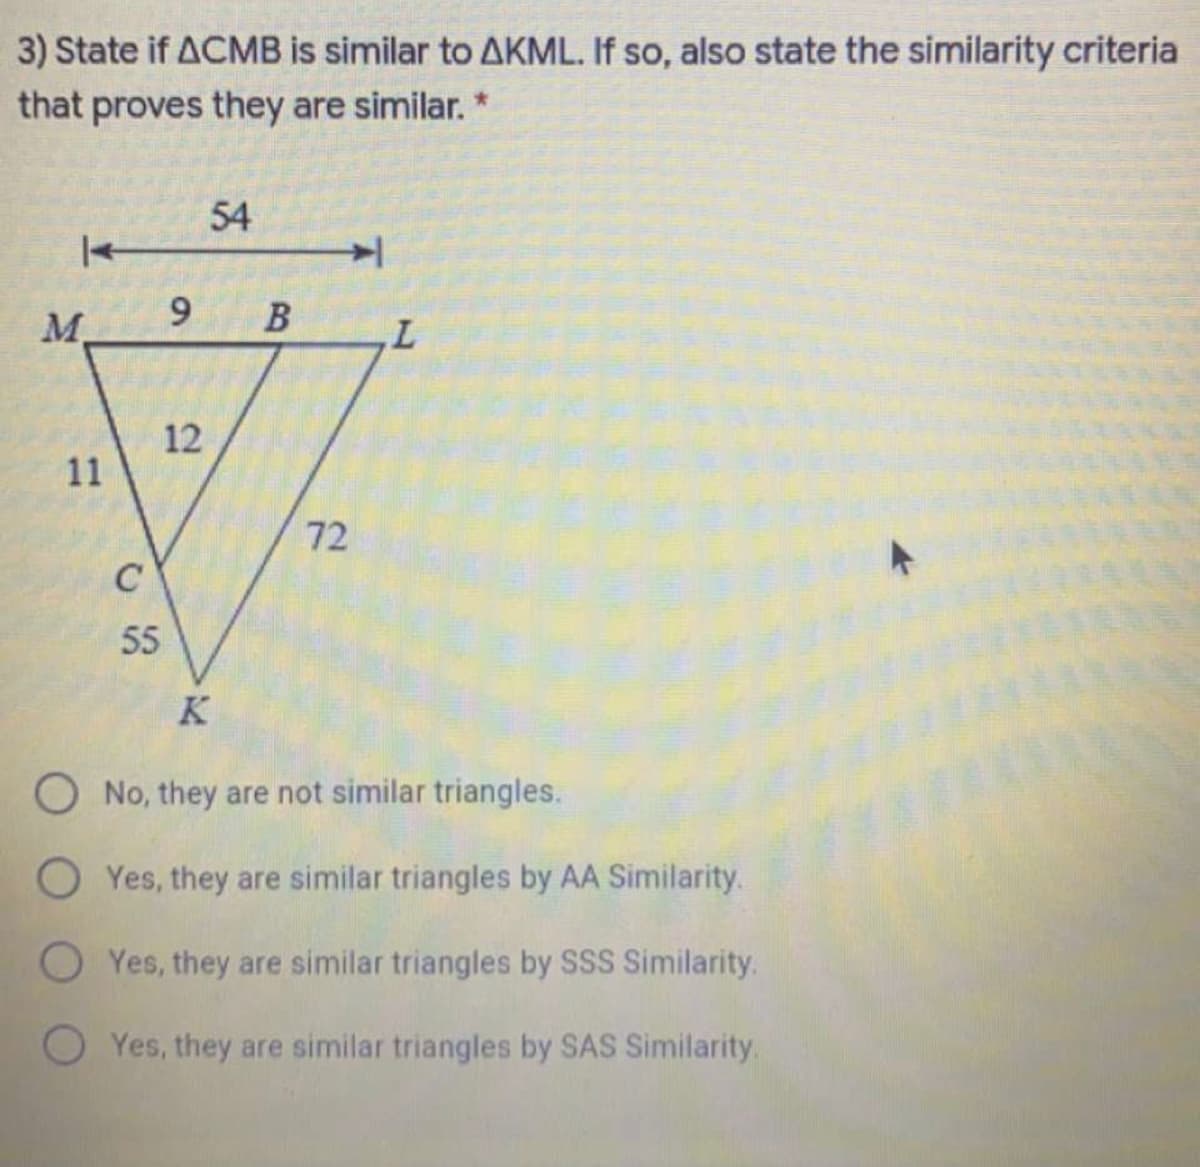 3) State if ACMB is similar to AKML. If so, also state the similarity criteria
that proves they are similar. *
54
M.
L.
12
72
C
55
K
O No, they are not similar triangles.
O Yes, they are similar triangles by AA Similarity.
O Yes, they are similar triangles by SSS Similarity.
O Yes, they are similar triangles by SAS Similarity.
9,
1.
1,
